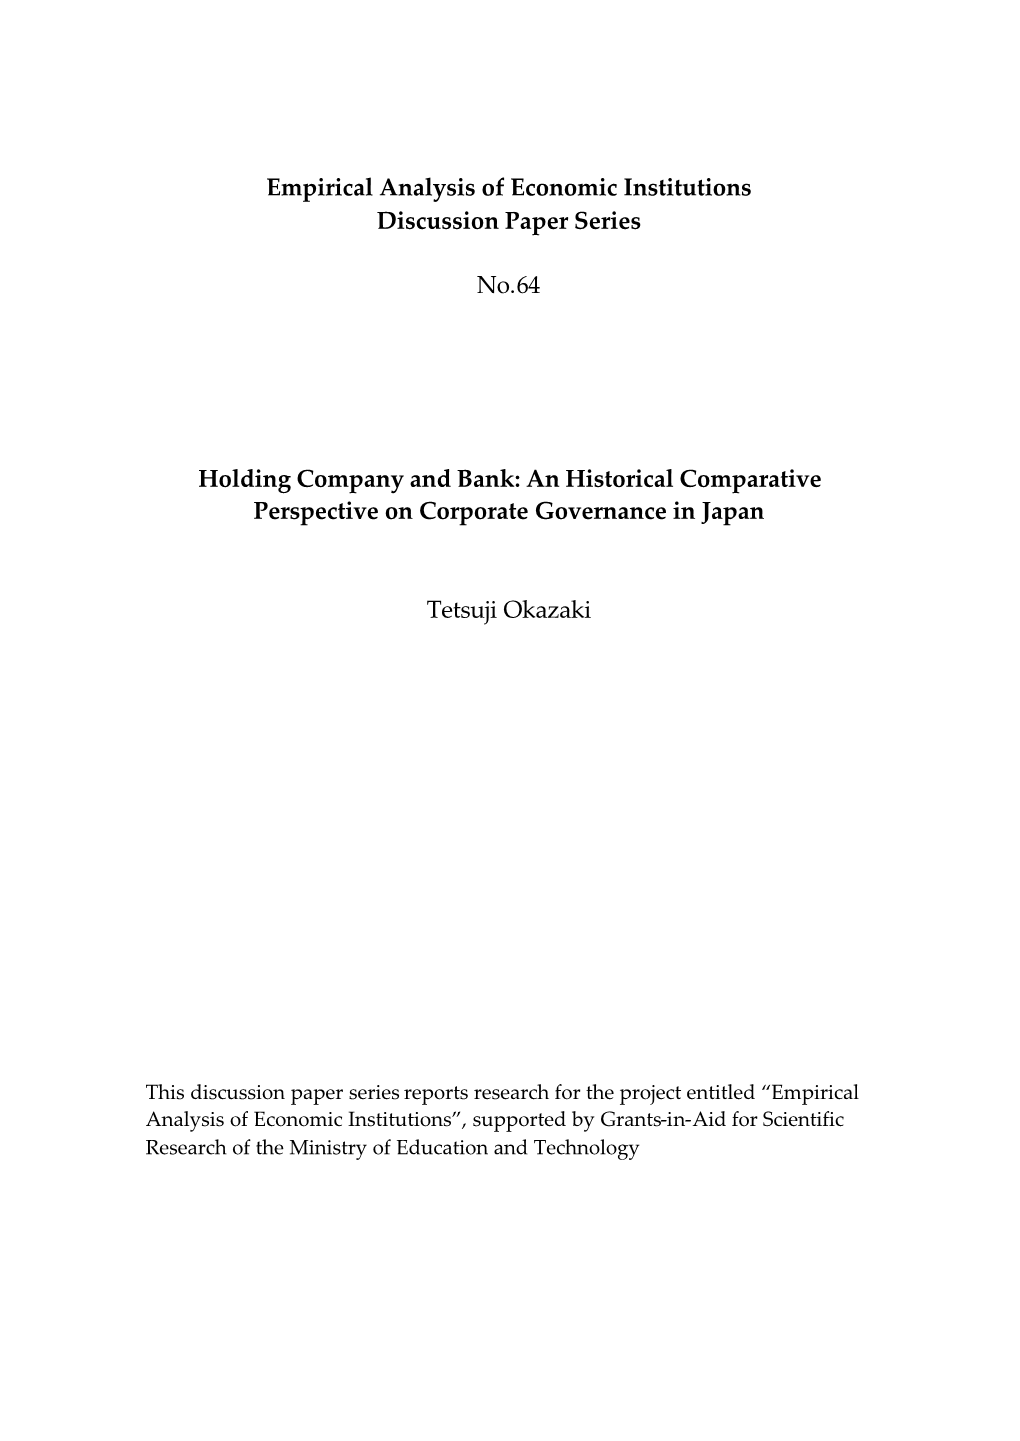 An Historical Comparative Perspective to Corporate Governance in Japan